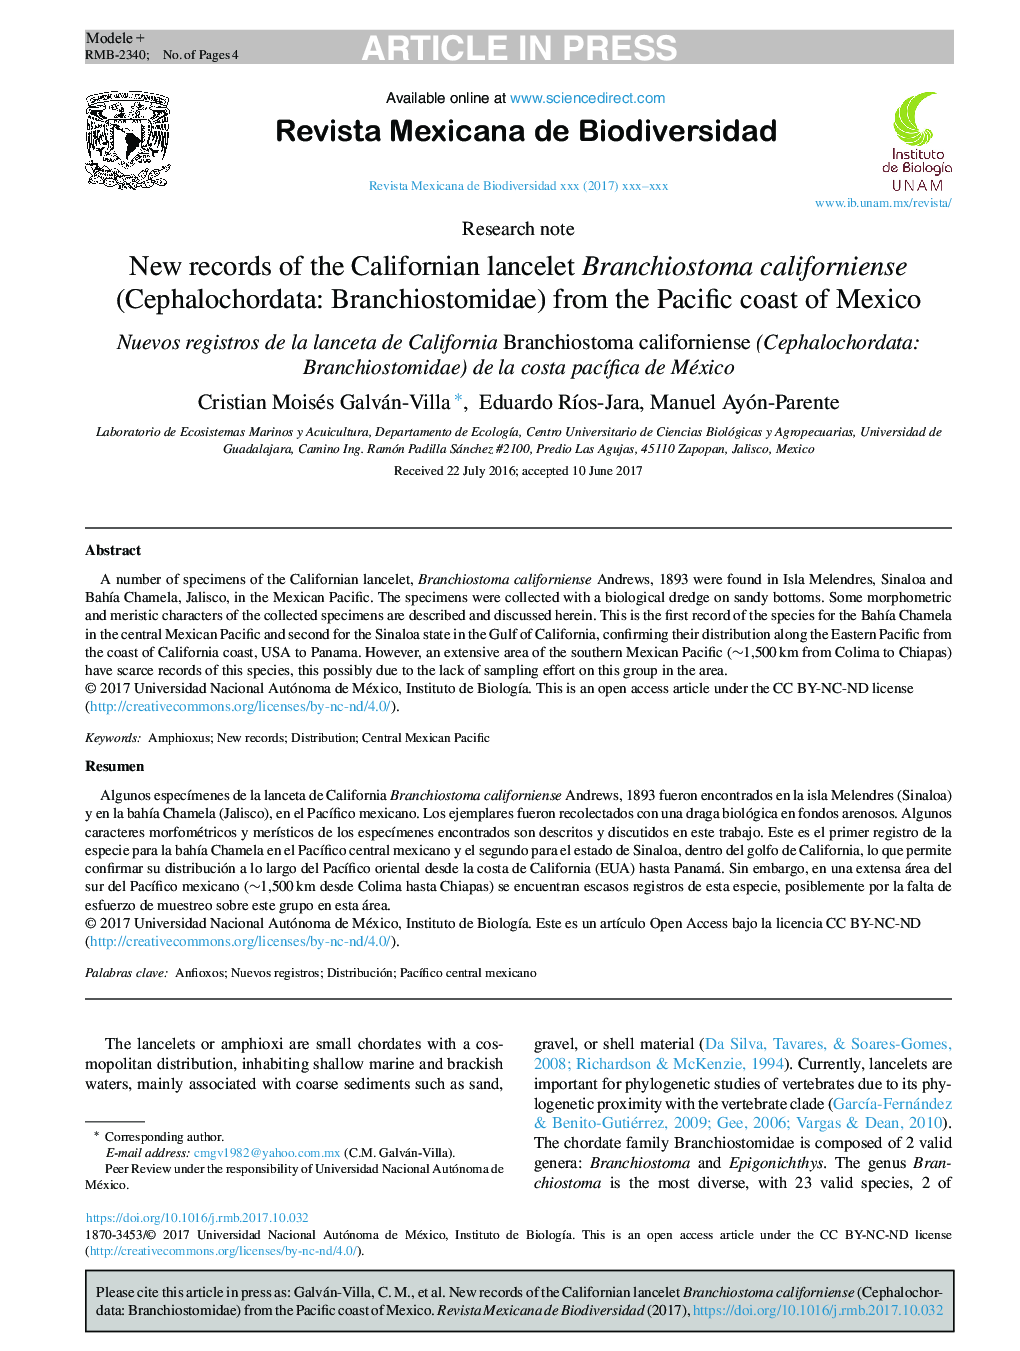 New records of the Californian lancelet Branchiostoma californiense (Cephalochordata: Branchiostomidae) from the Pacific coast of Mexico